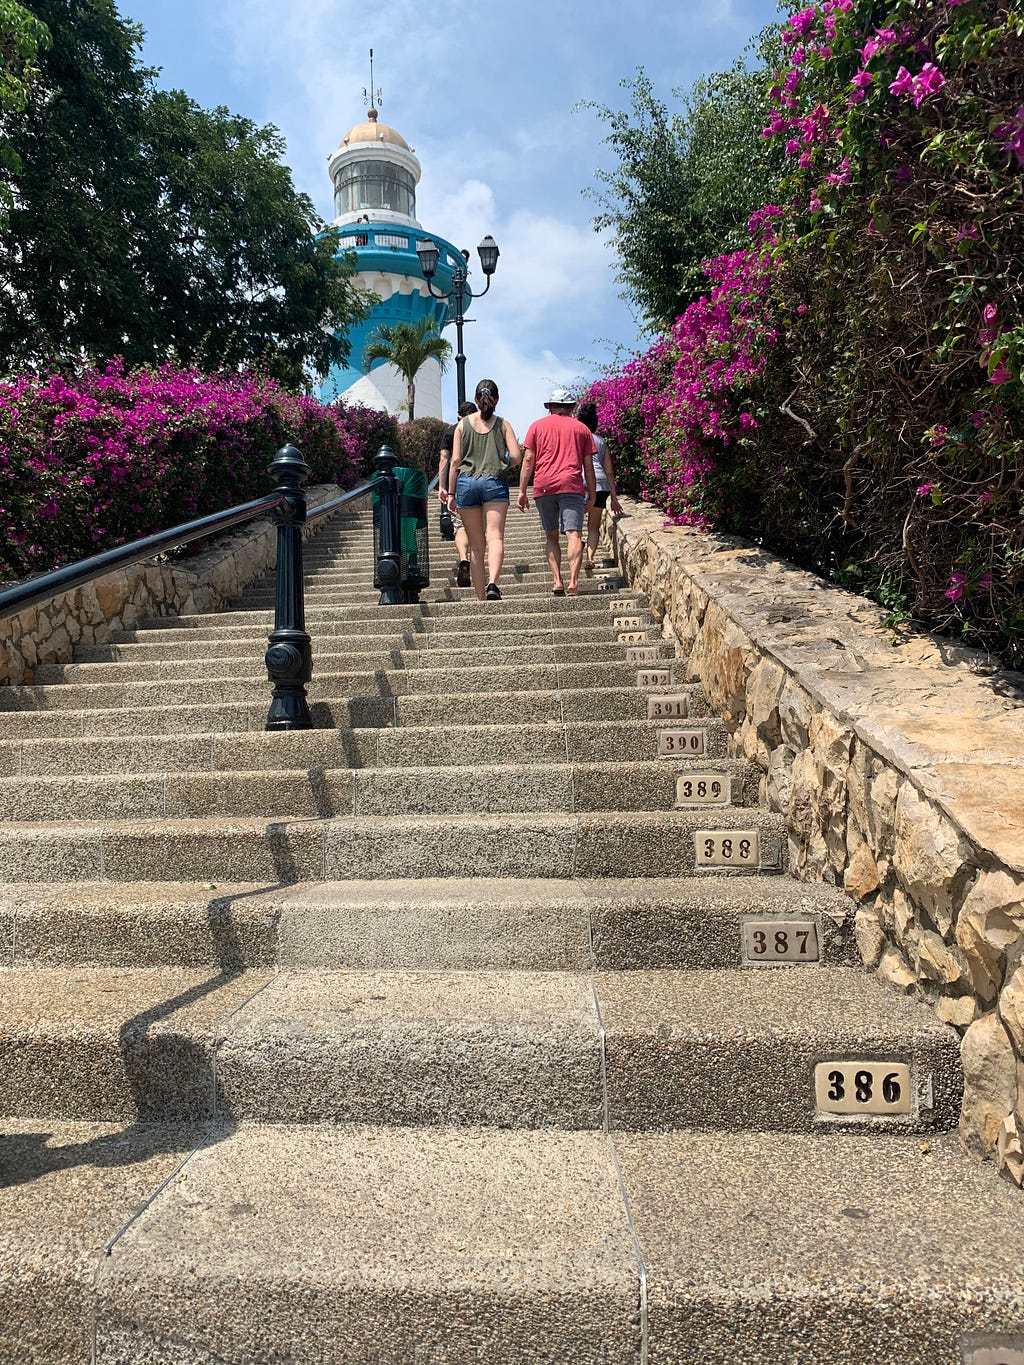 The numbered steps of Las Peñas are visible. Four people walk up the steps. Purple flowers are on either side of the stairs.